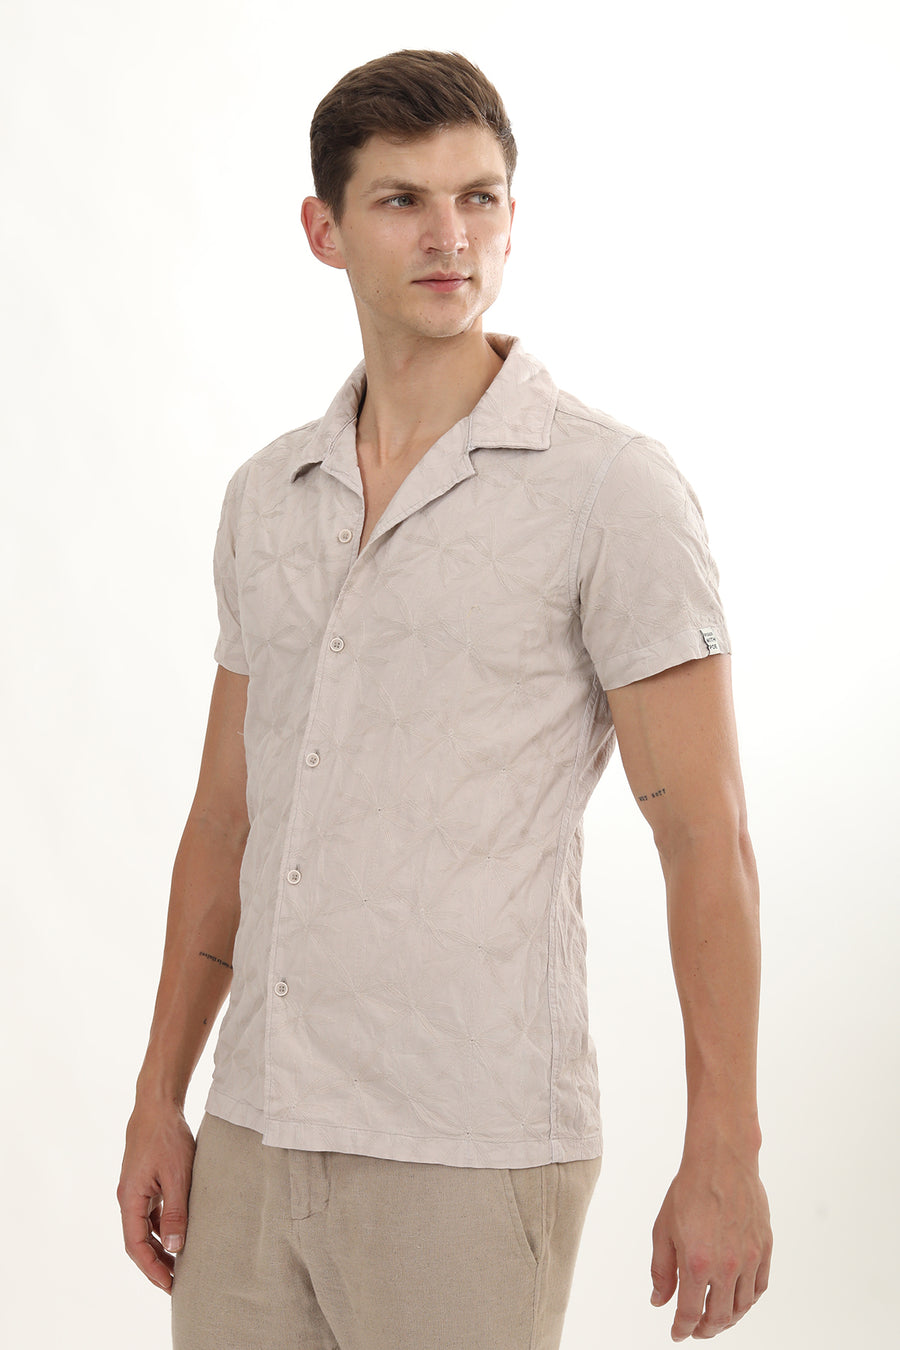 Flake - Dyed Embroidered Shirt - Beige